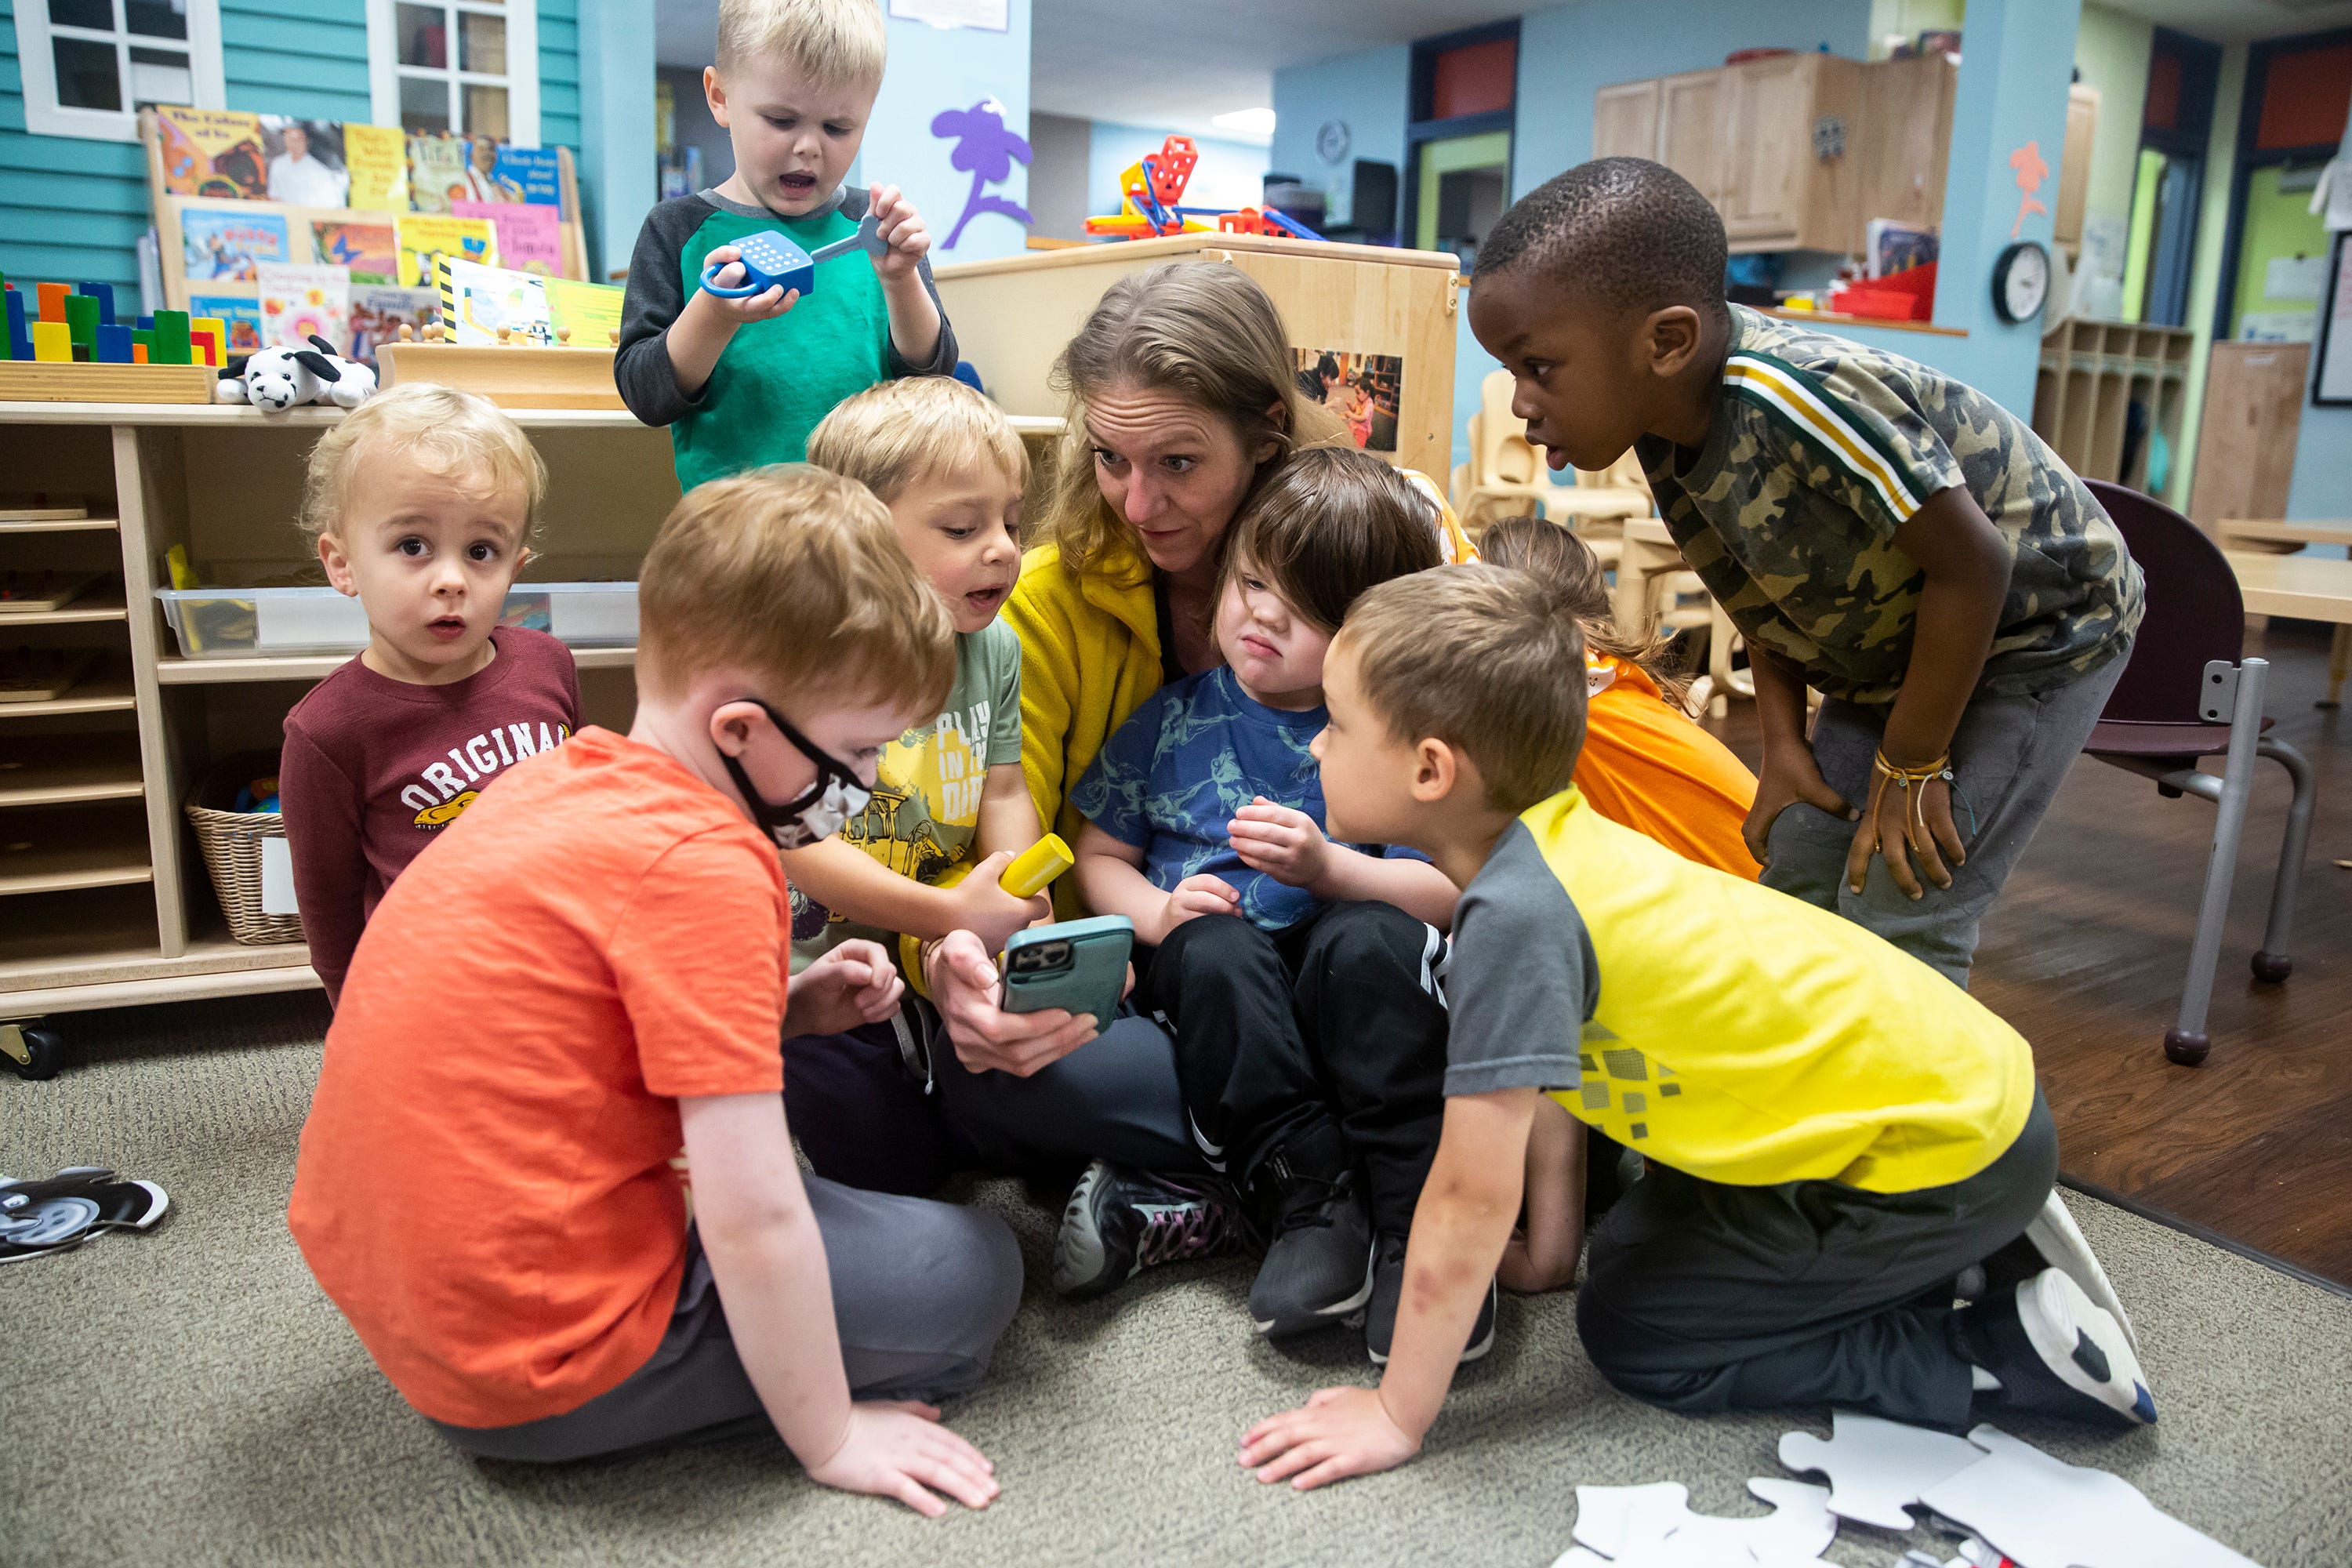 Sadie Gunther, a Child development specialist, shows a group of kids photos of animals on her phone, at the DMACC Child Development Center, on May 24, 2022, in Ankeny. The child development center is a lab school providing training for early childhood education teachers.